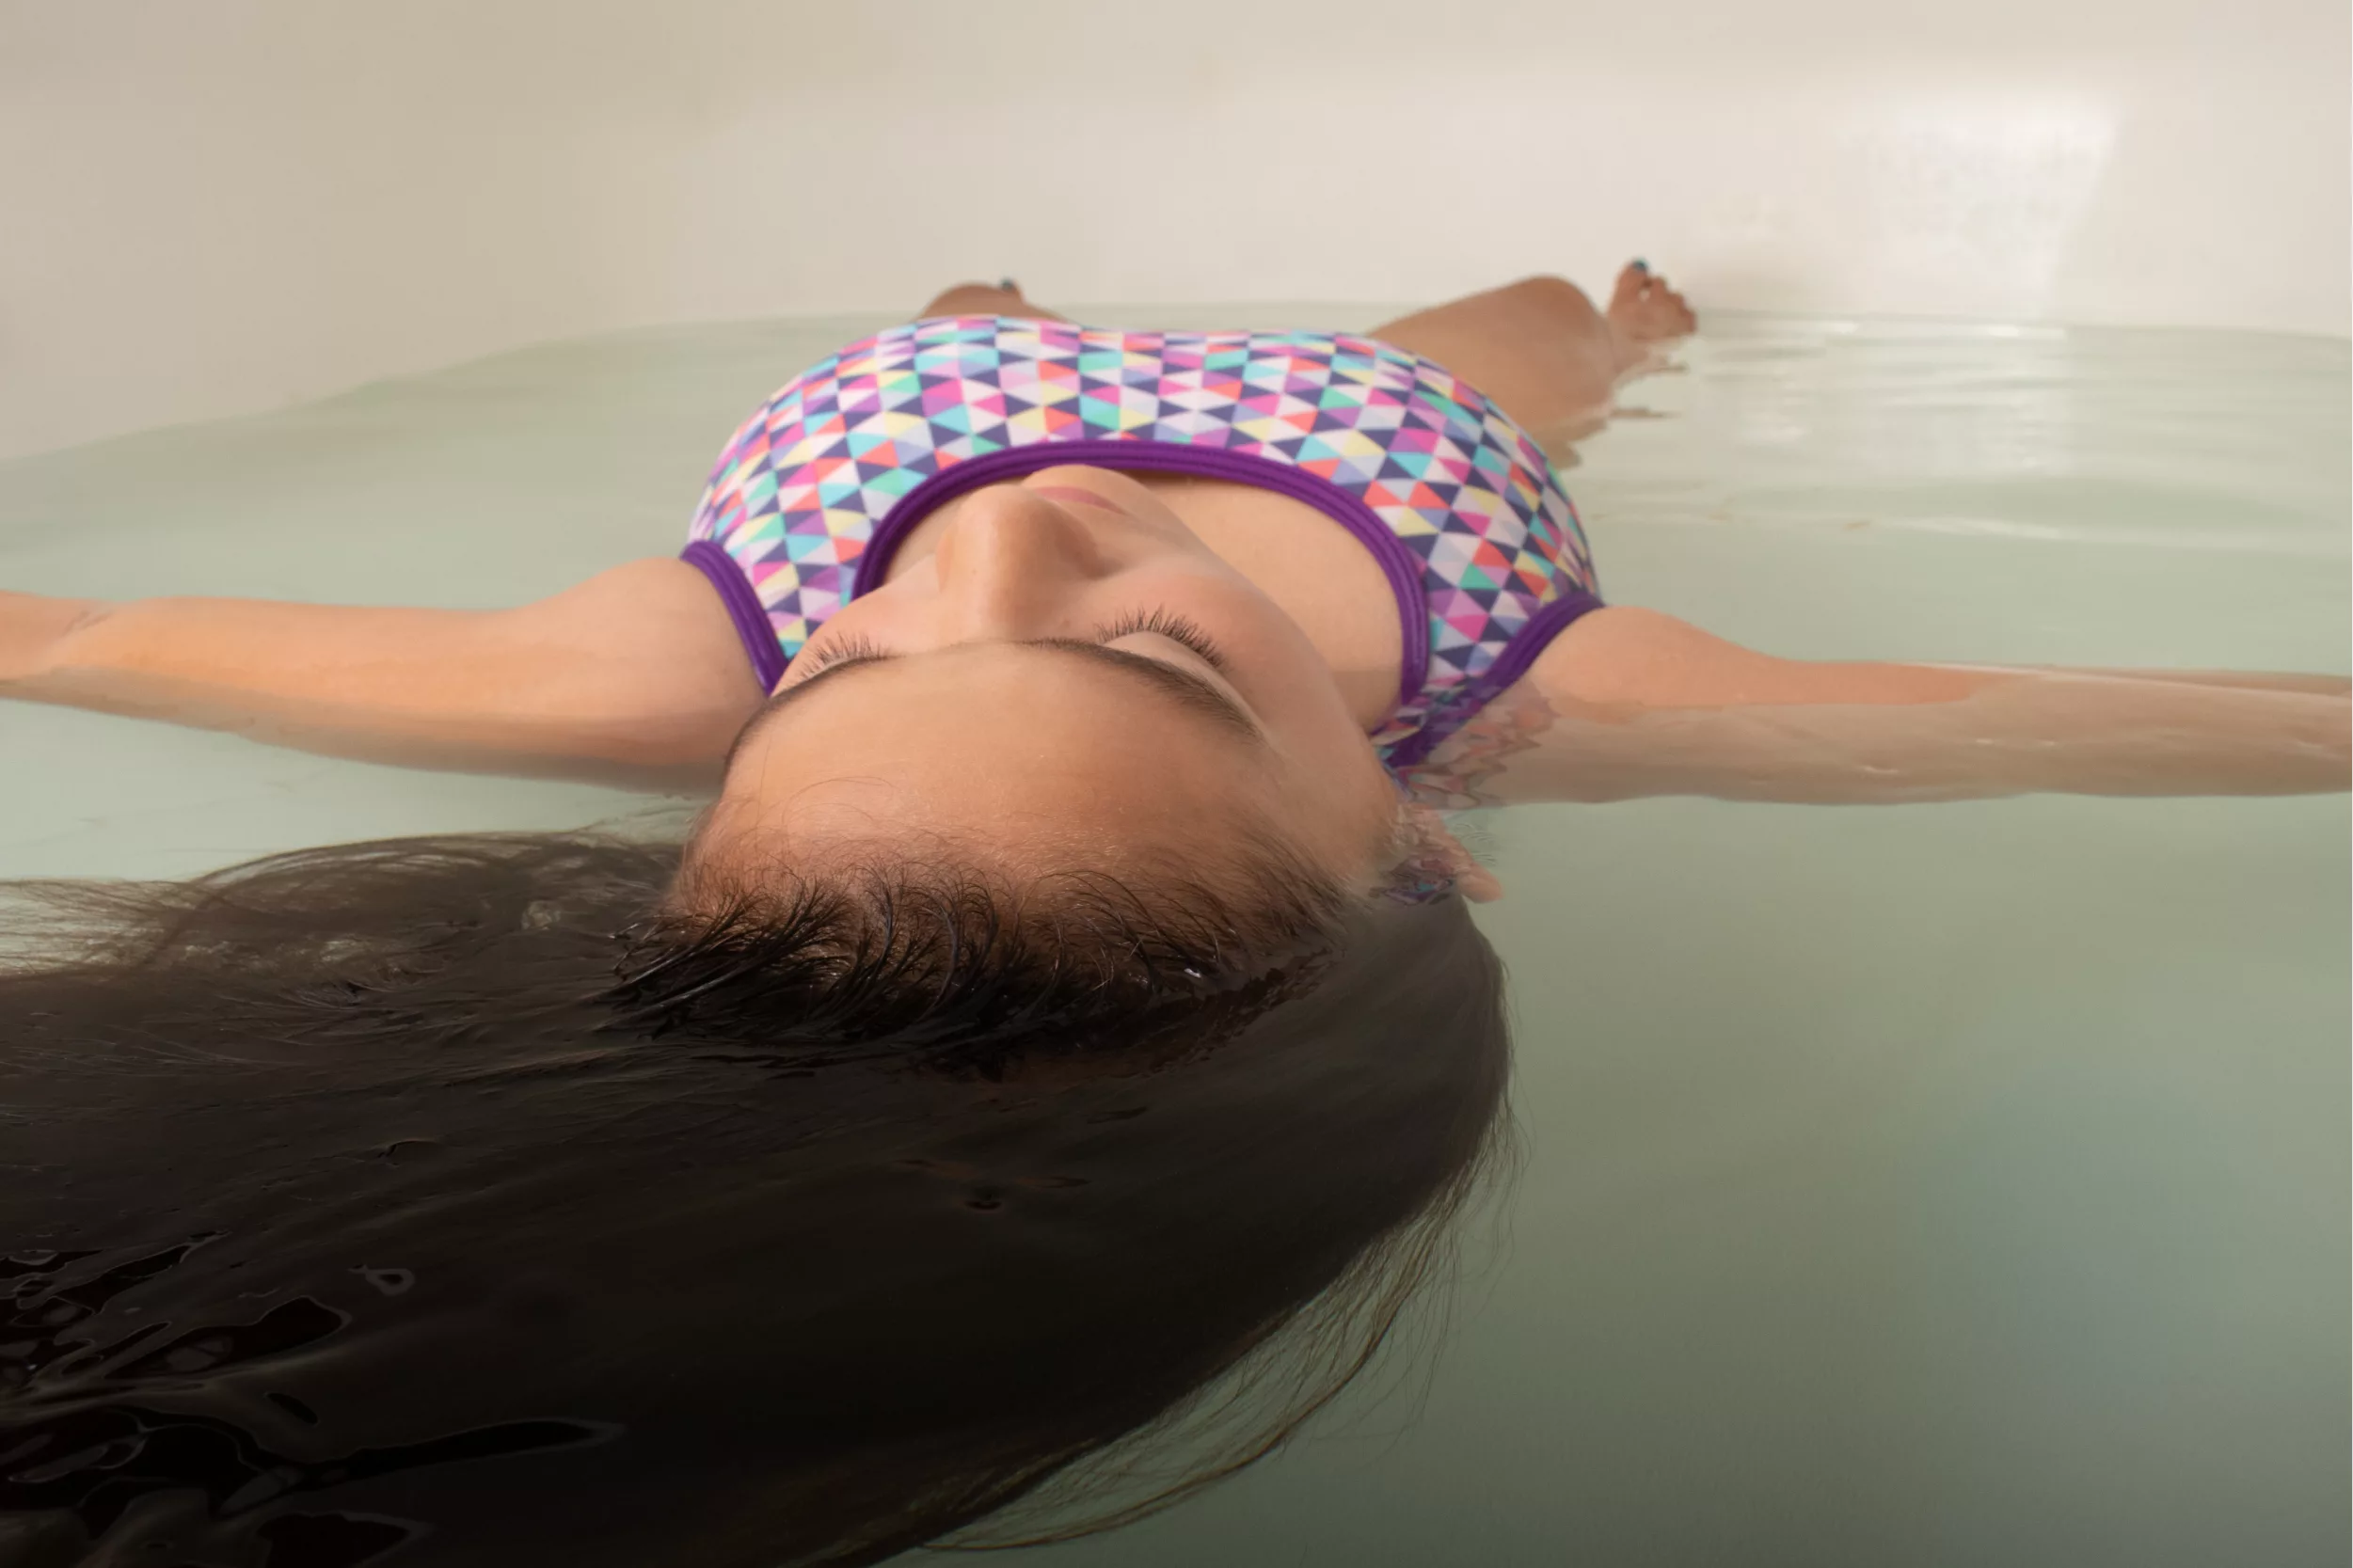 The Science Behind Floating and Relaxation